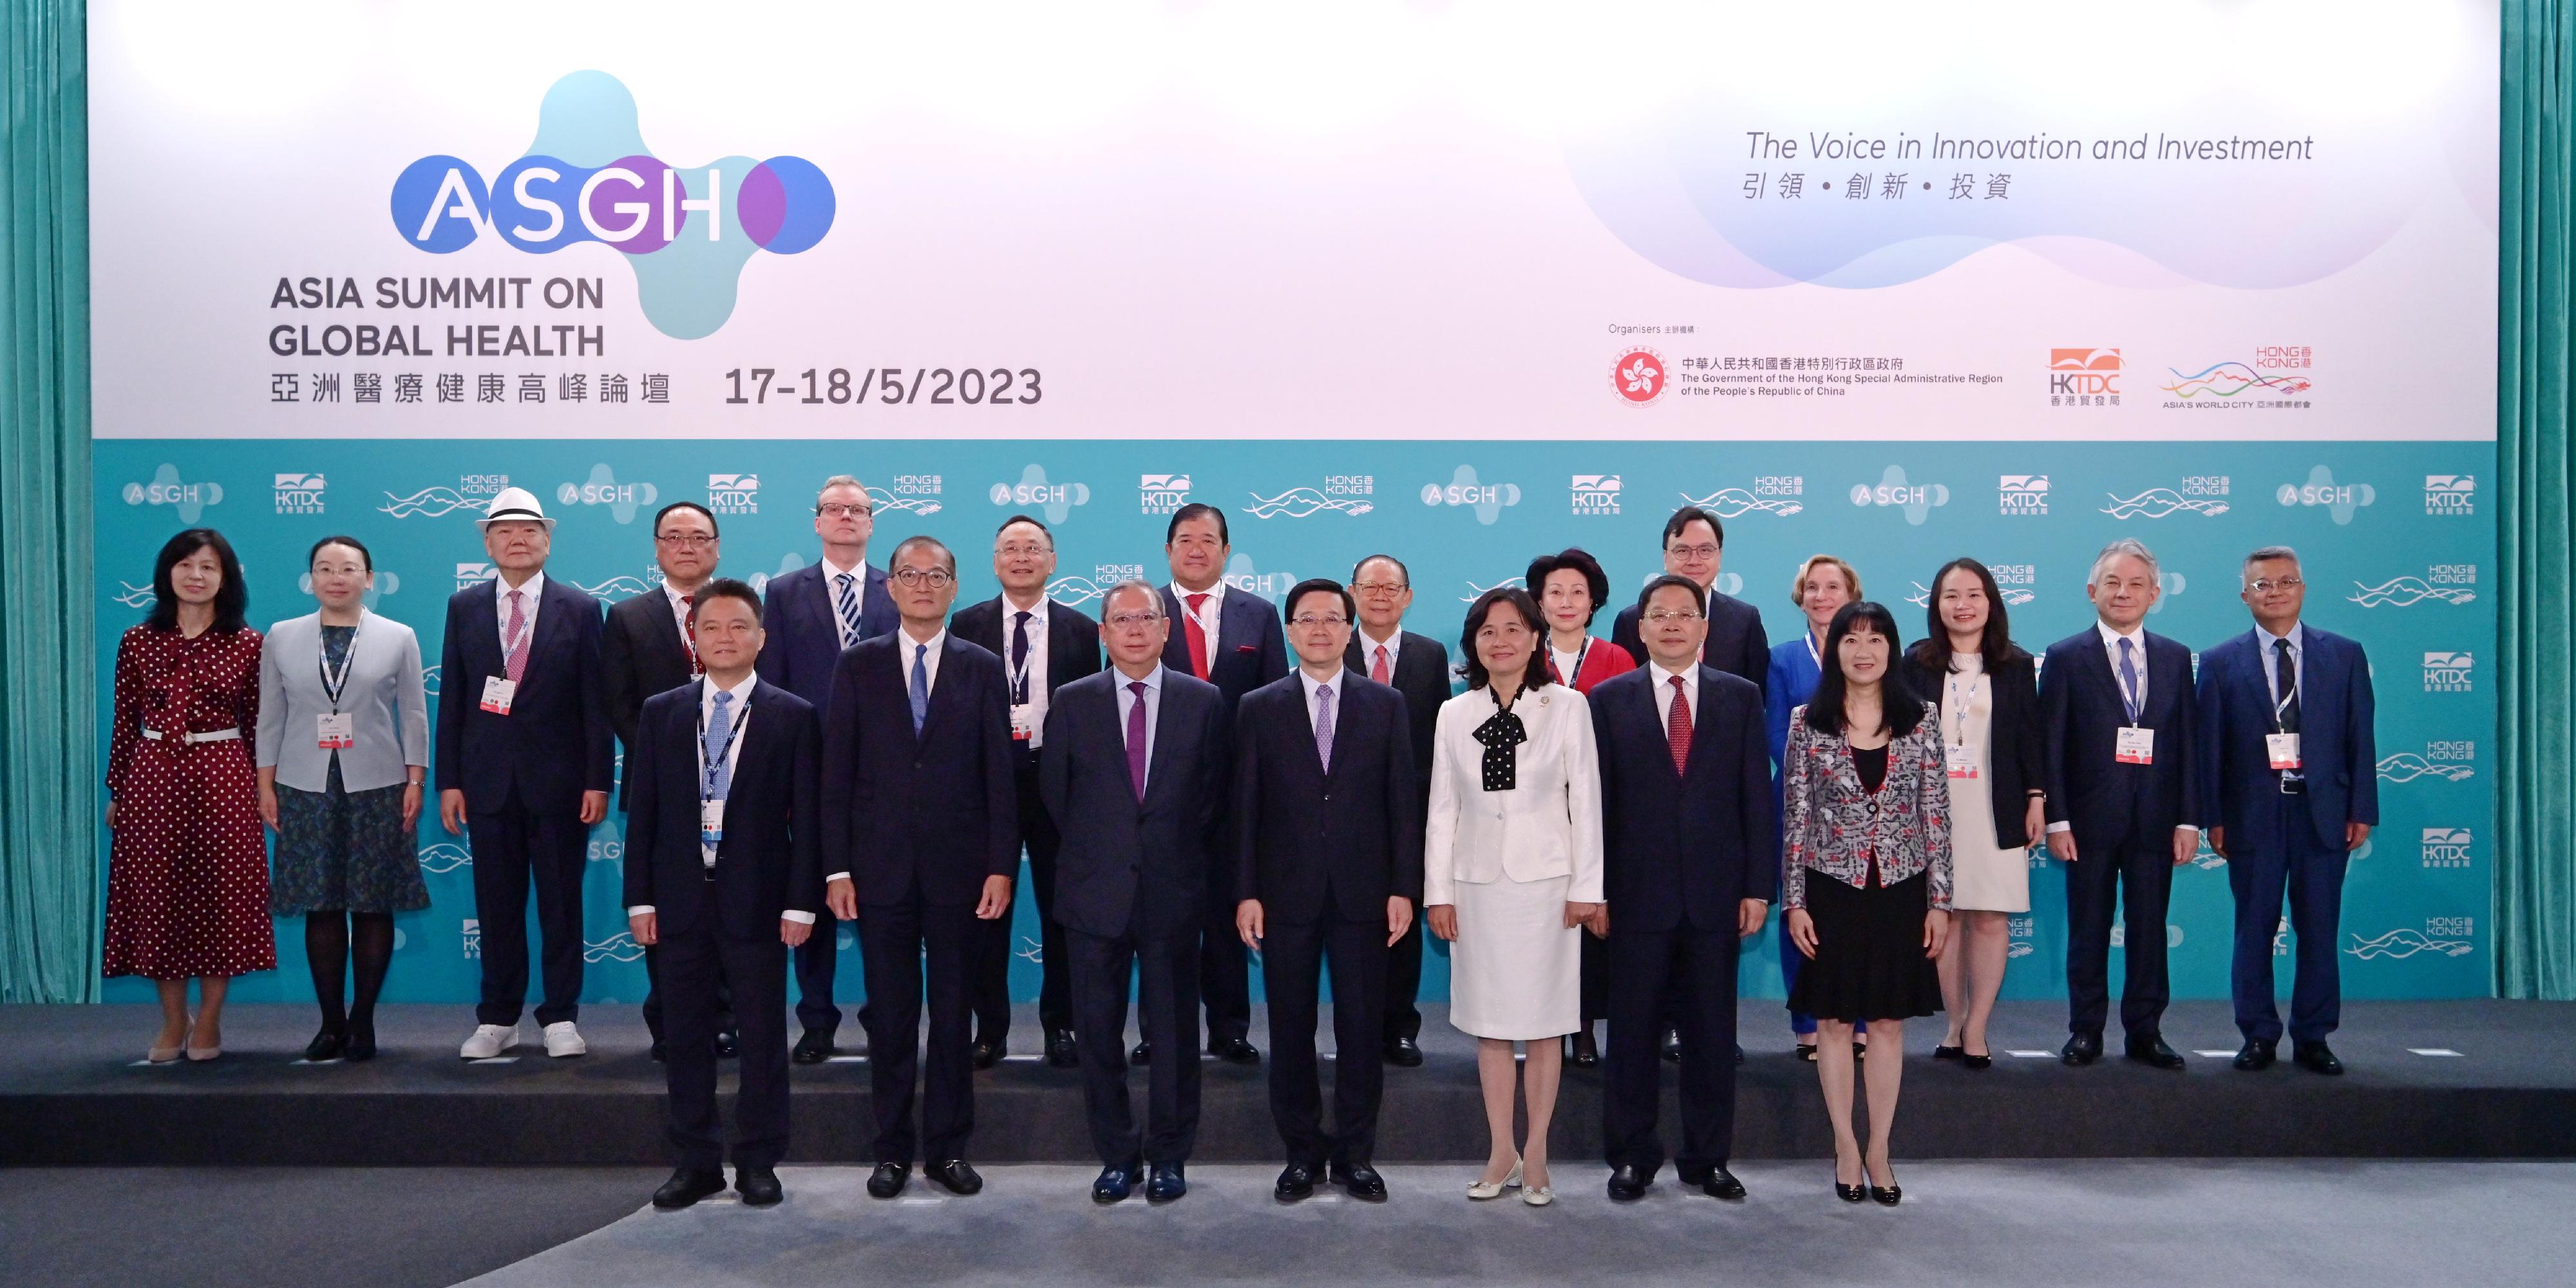 The Chief Executive, Mr John Lee, attended the Asia Summit on Global Health today (May 17). Photo shows (front row, from left) the Party Secretary and Director of the Health Commission of Guangdong Province, Mr Zhu Hong; the Secretary for Health, Professor Lo Chung-mau; the Chairman of the Hong Kong Trade Development Council (HKTDC), Dr Peter Lam; Mr Lee; the Party Group Member of the National Health Commission cum Party Secretary of the National Administration of Traditional Chinese Medicine, Professor Yu Yanhong; Deputy Director of the Liaison Office of the Central People's Government in the Hong Kong Special Administrative Region Mr Yin Zonghua; the Executive Director of the HKTDC, Ms Margaret Fong, and other guests. 